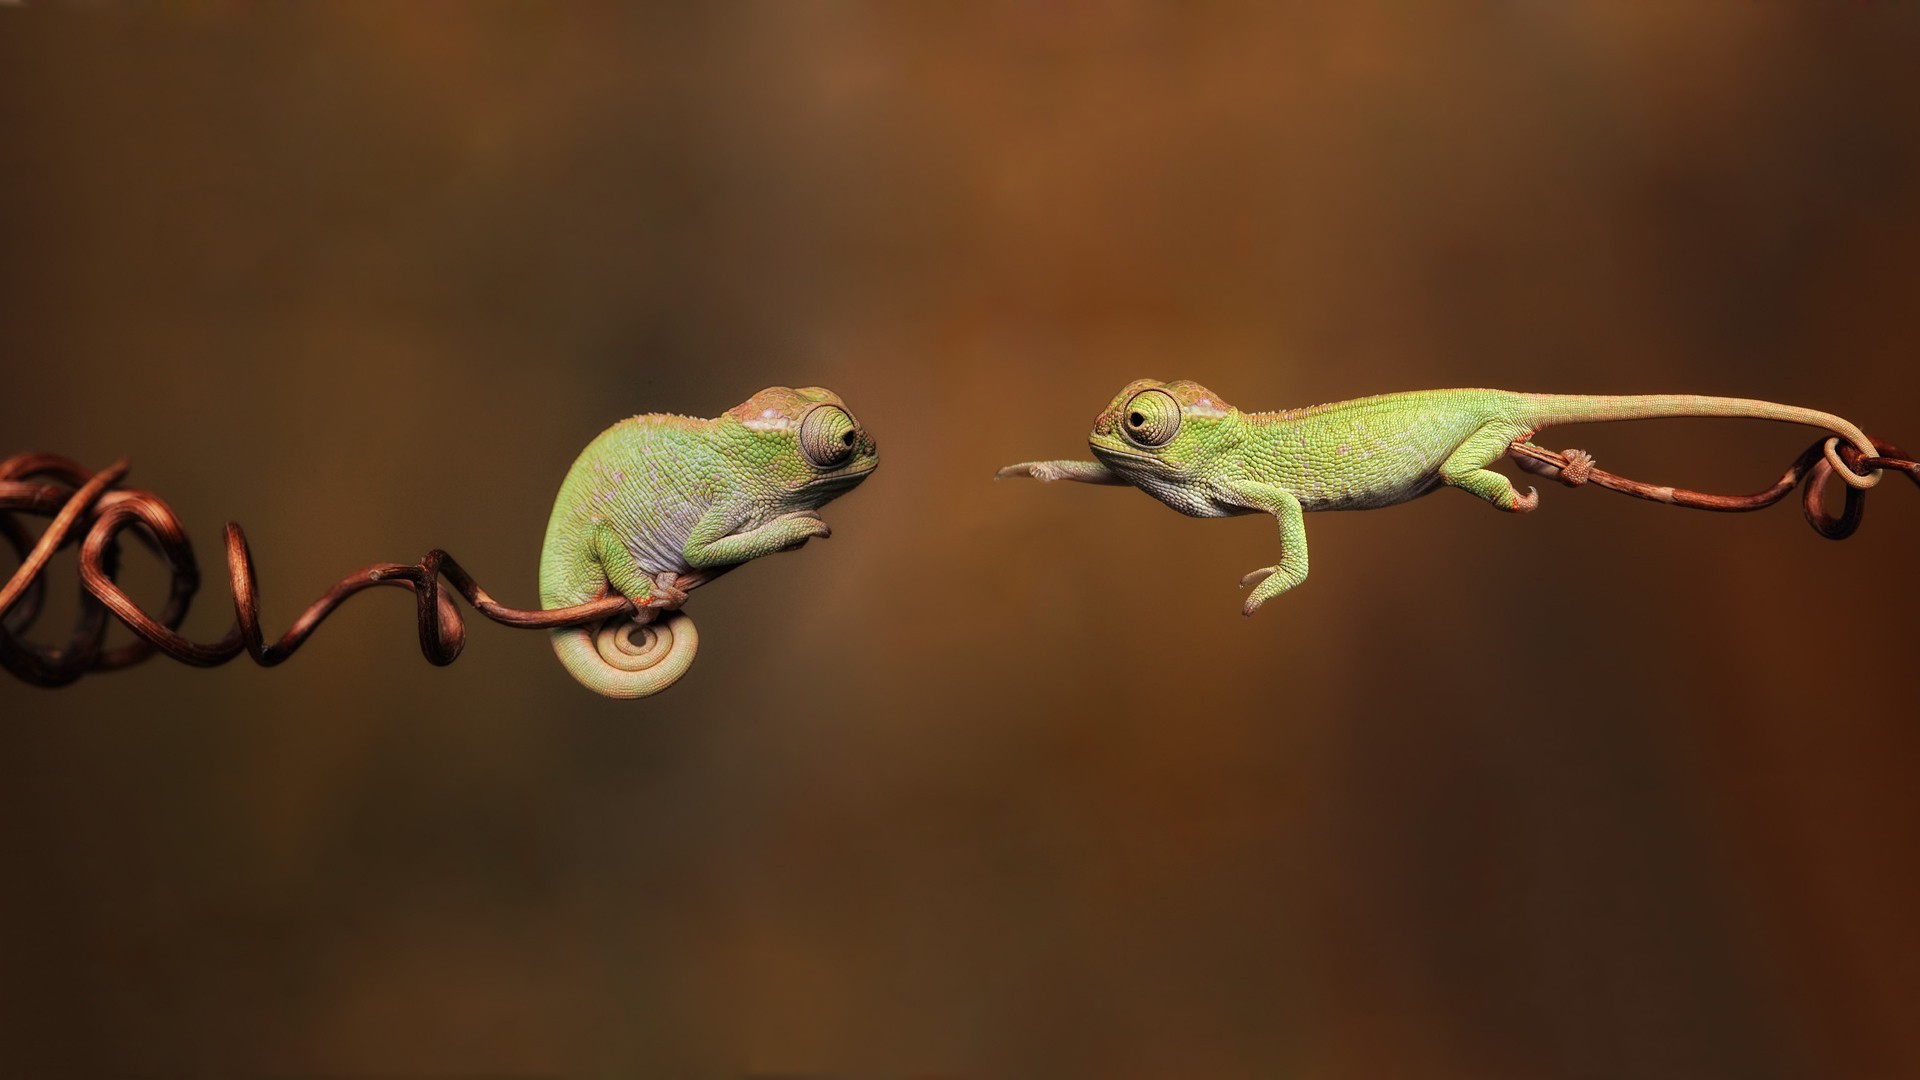 green, Blurred, Hope, Jumping, Animals, Wildlife, Reptile, Chameleons, Twigs Wallpaper